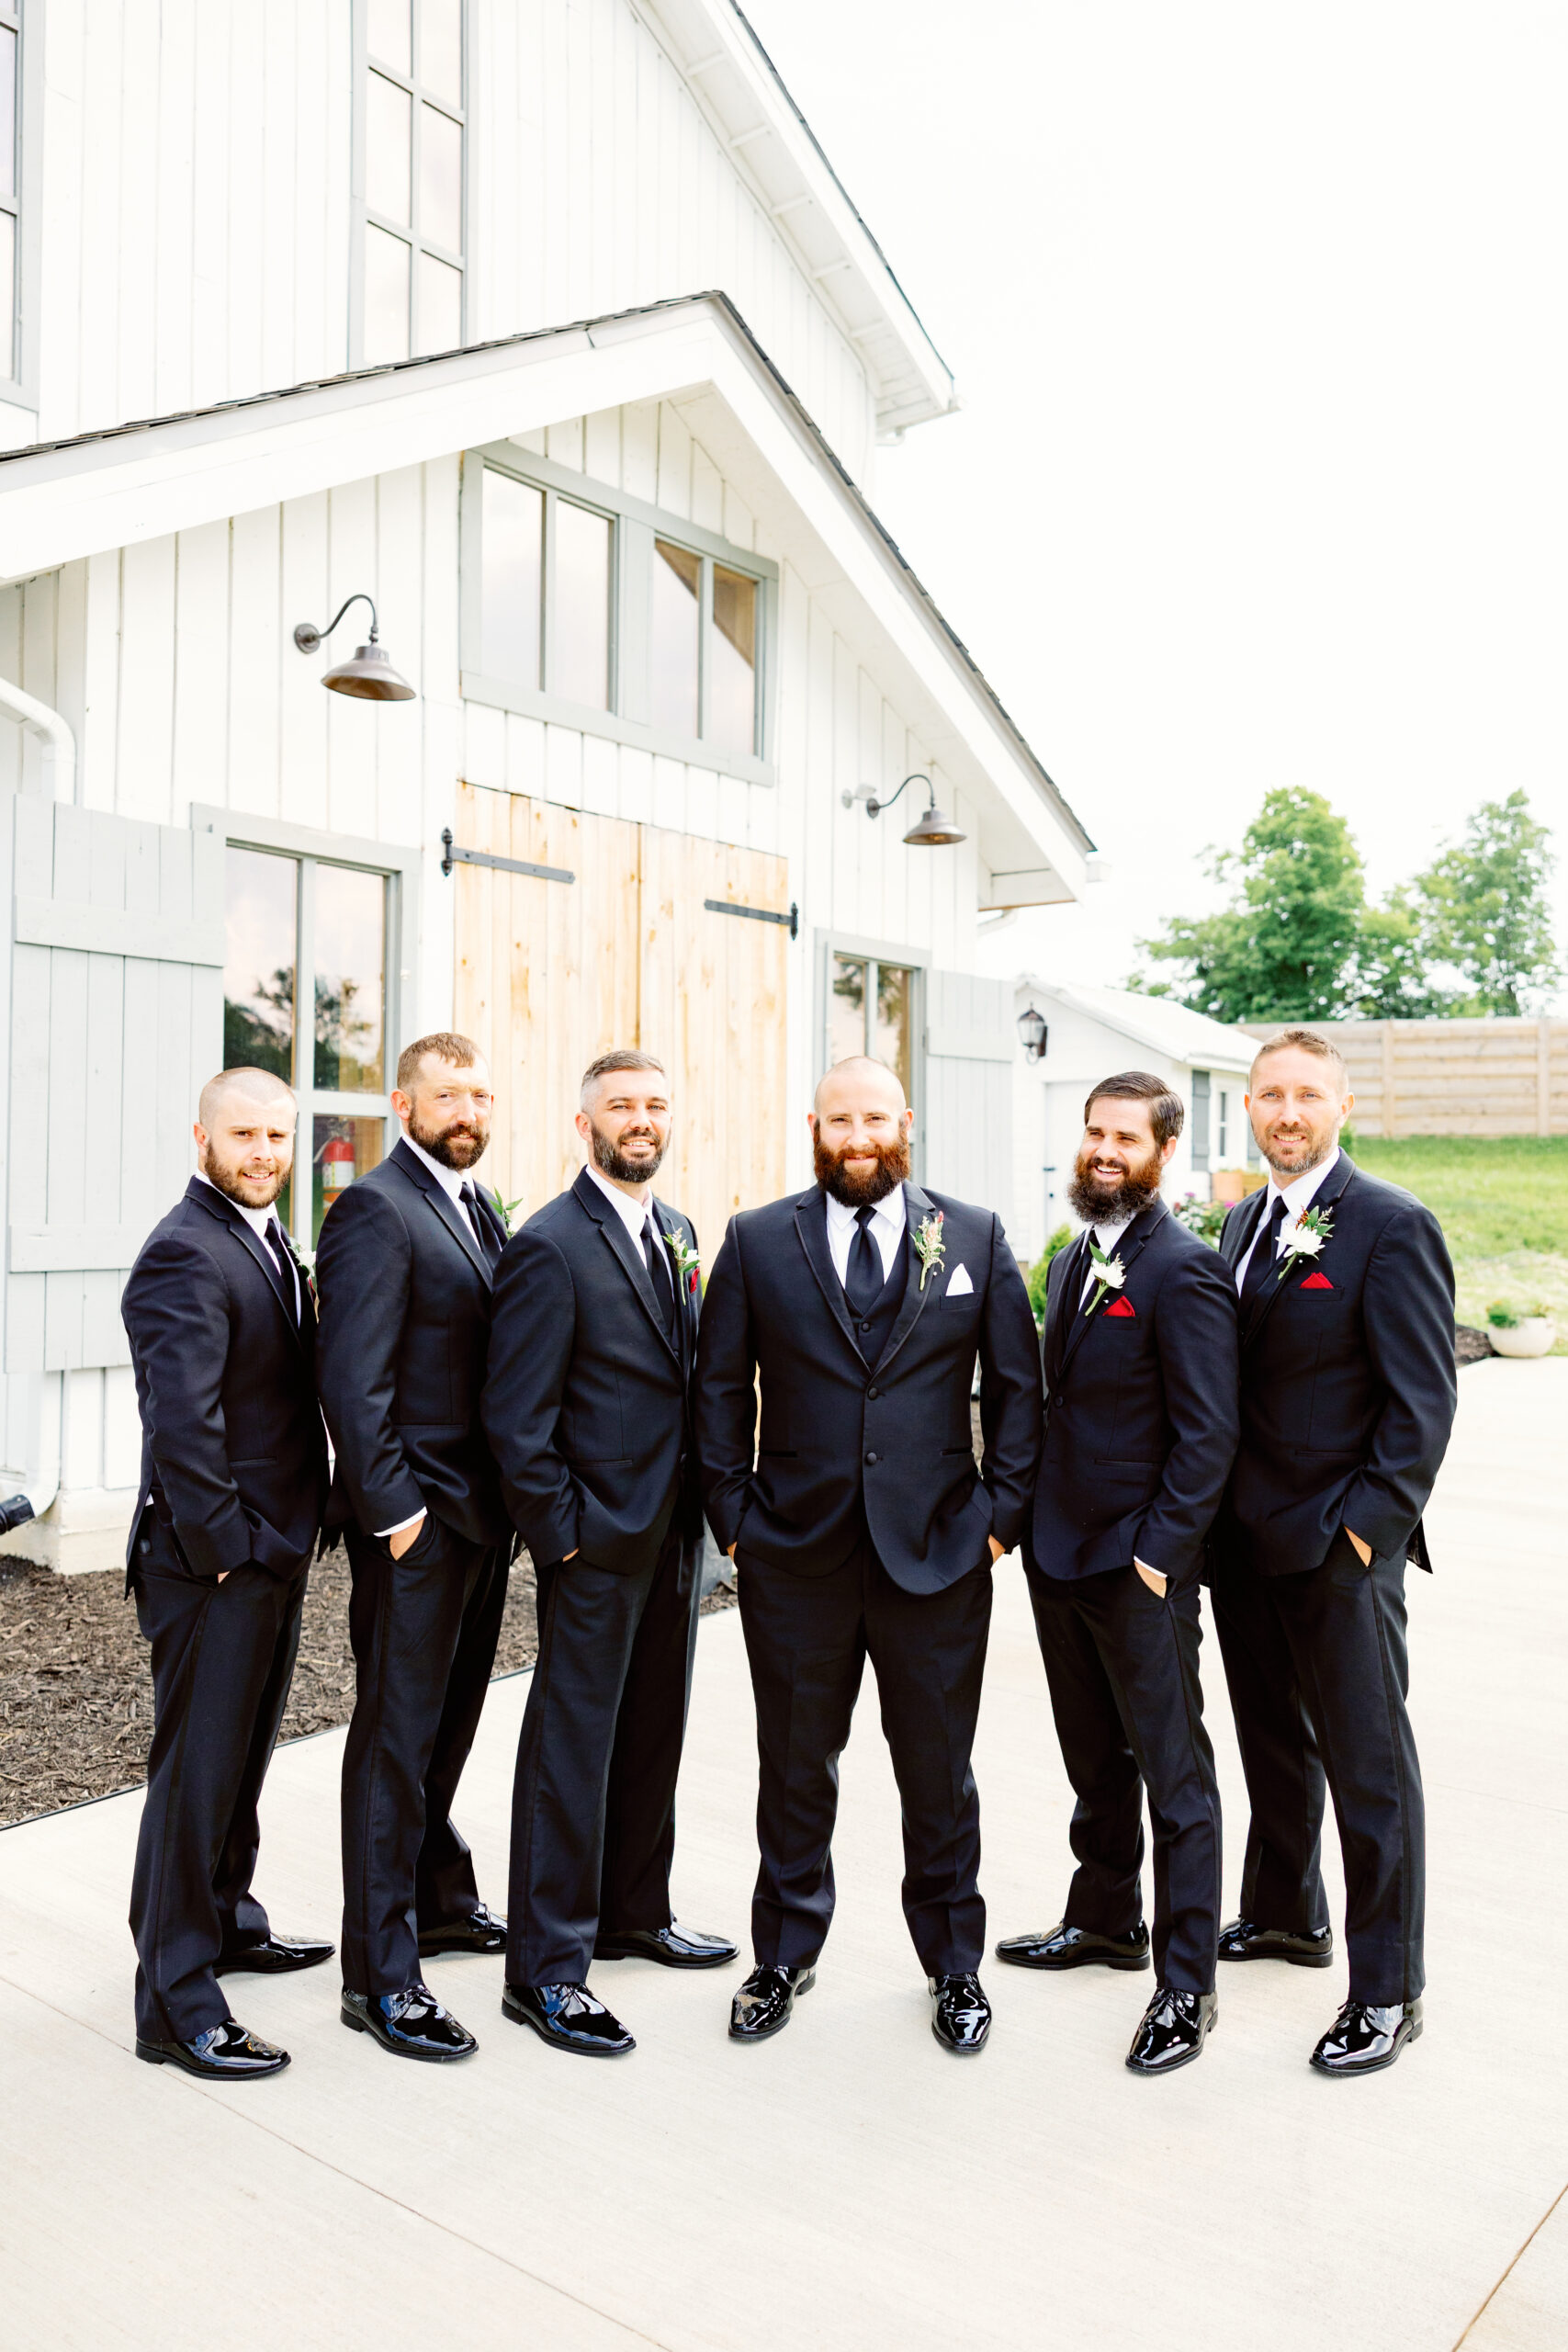 The groomsmen posing in front of the barn.